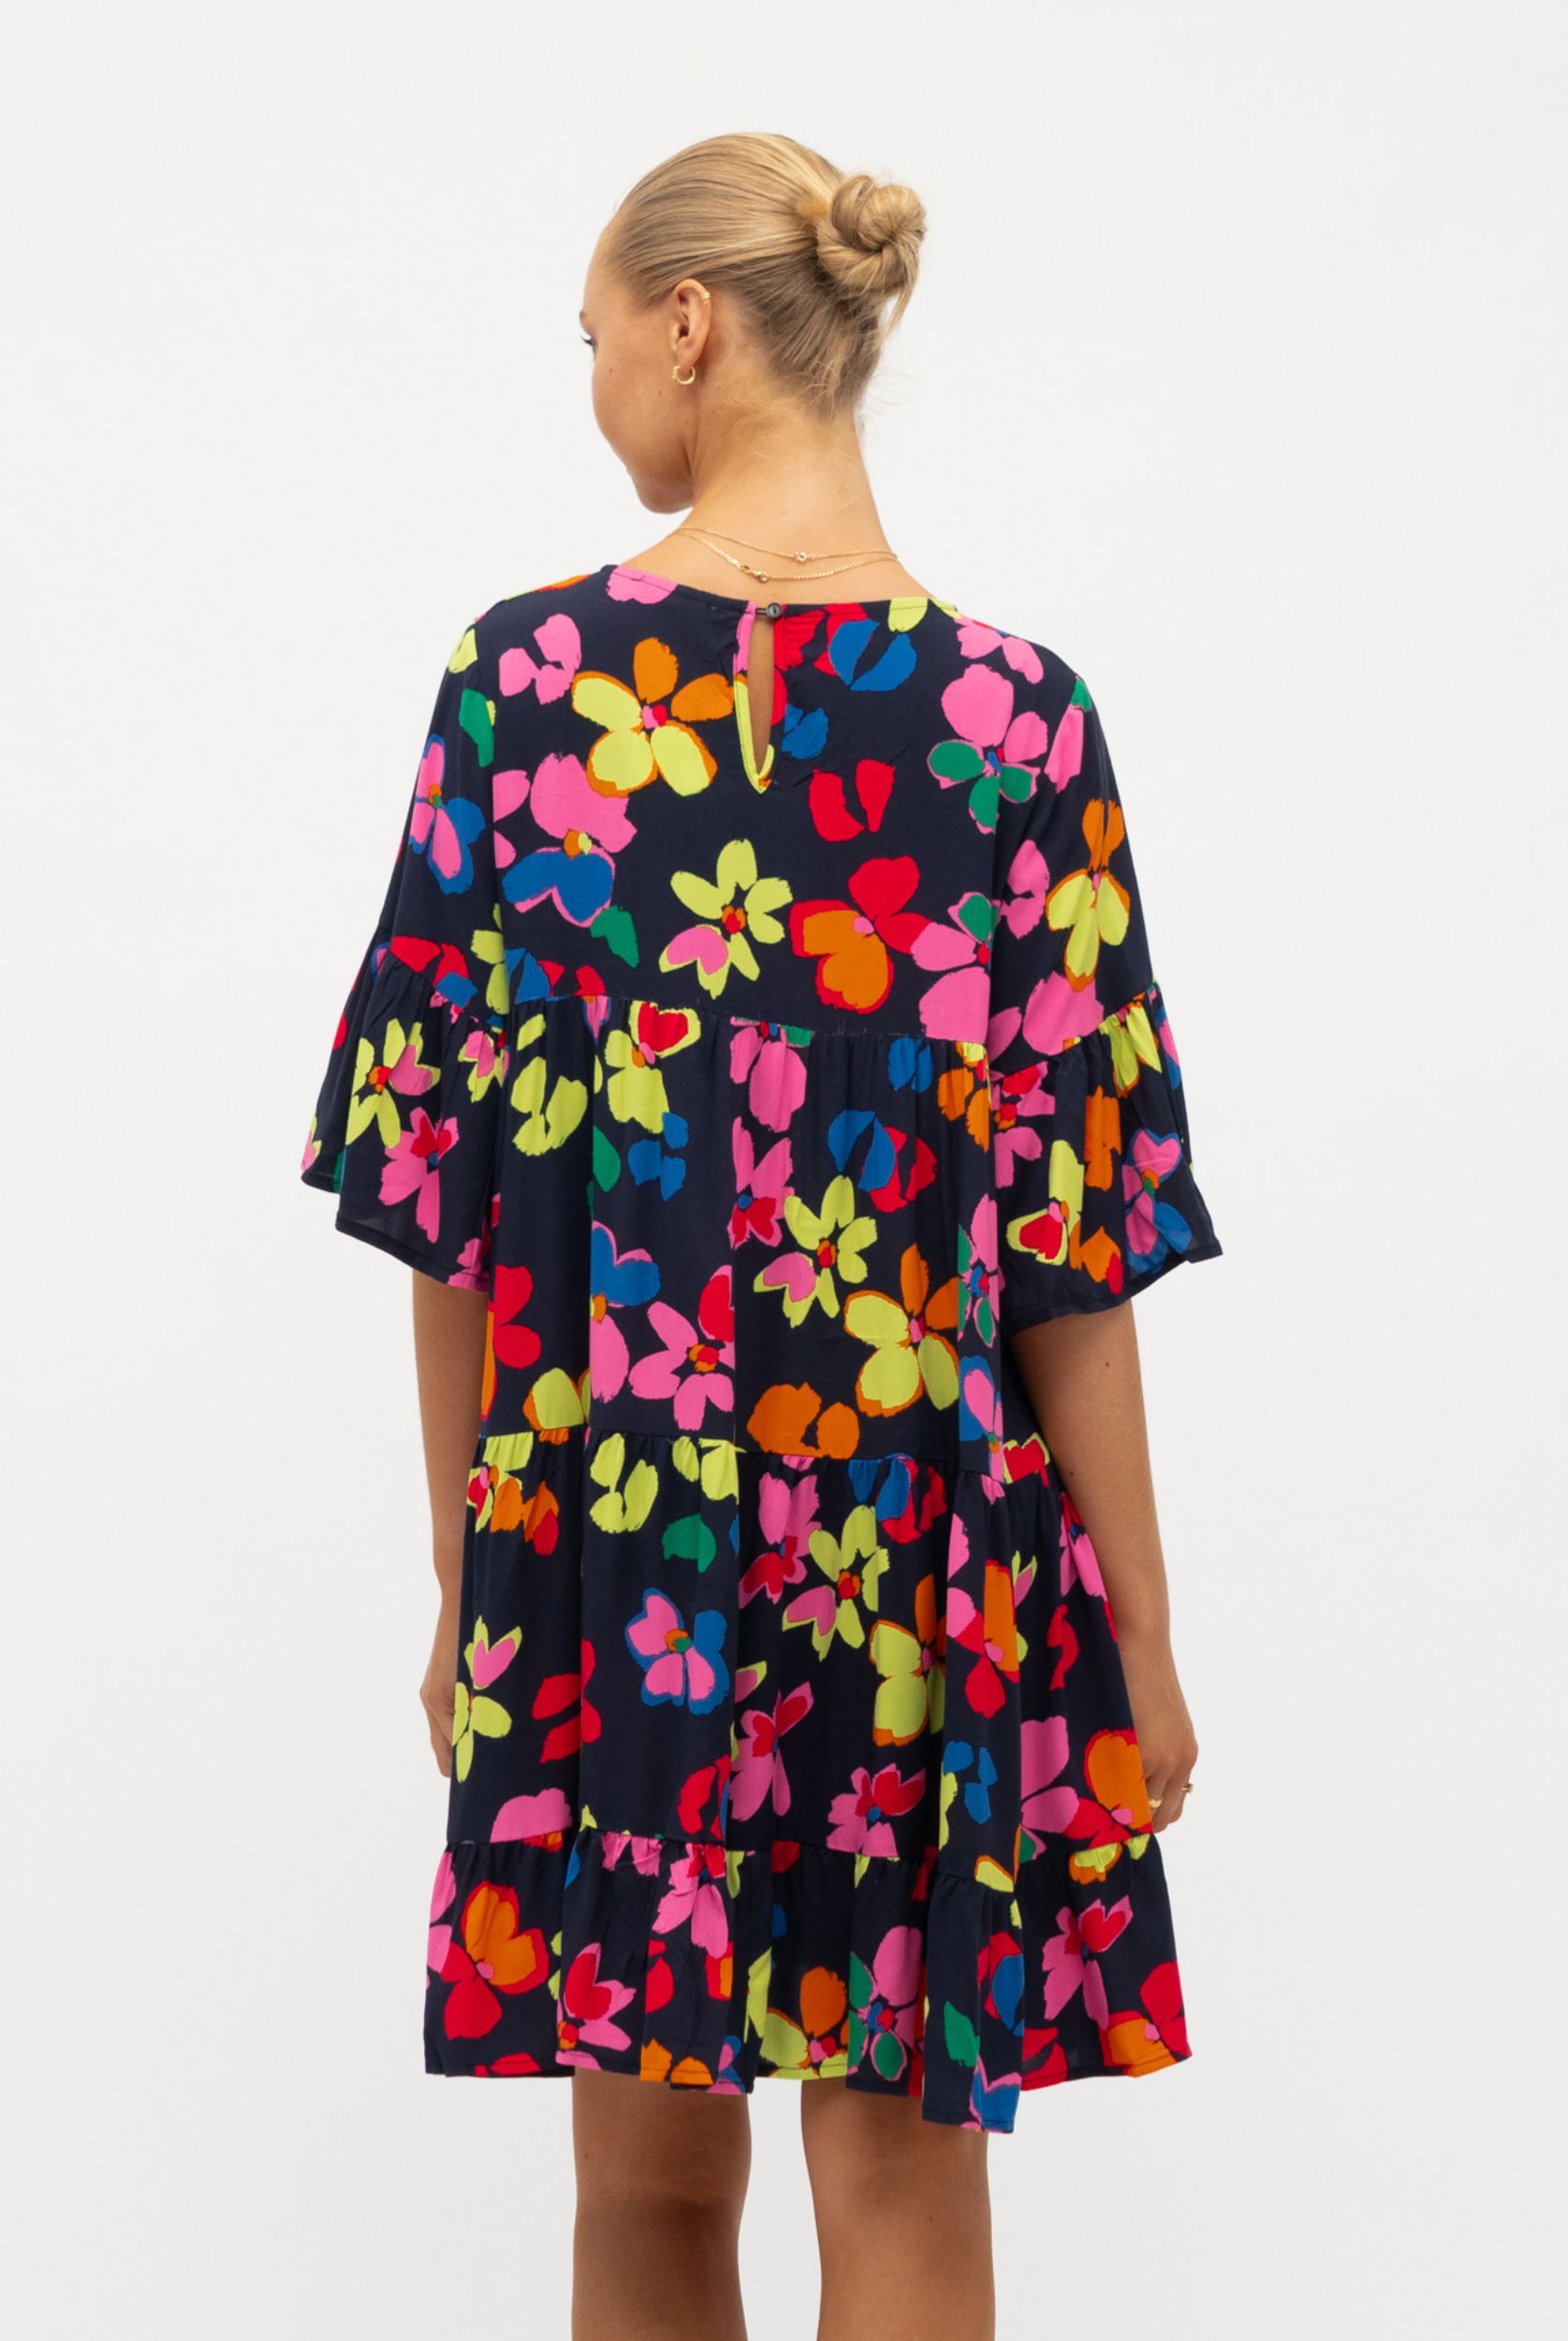 Model wearing the bright floral Addison Dress